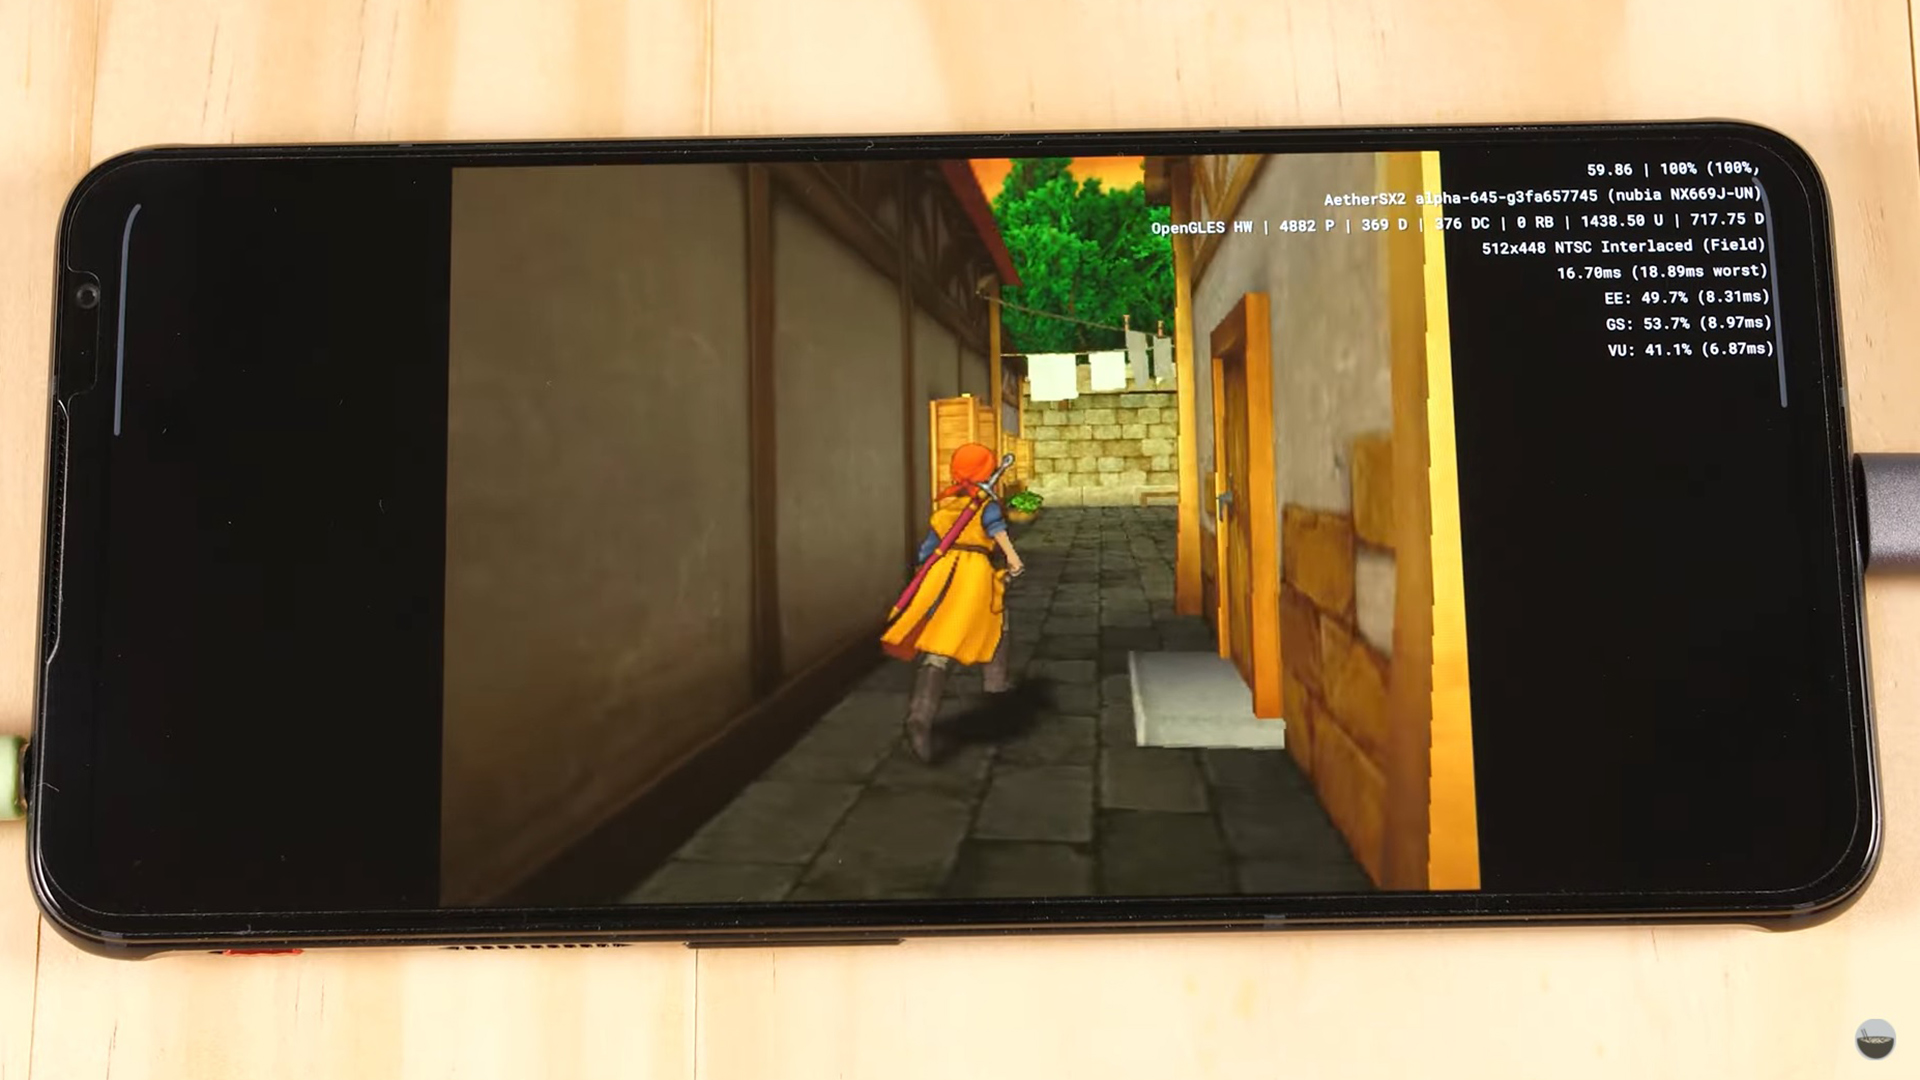 AetherSX2 PS2 Emualtor Android Alpha Test taki Udon